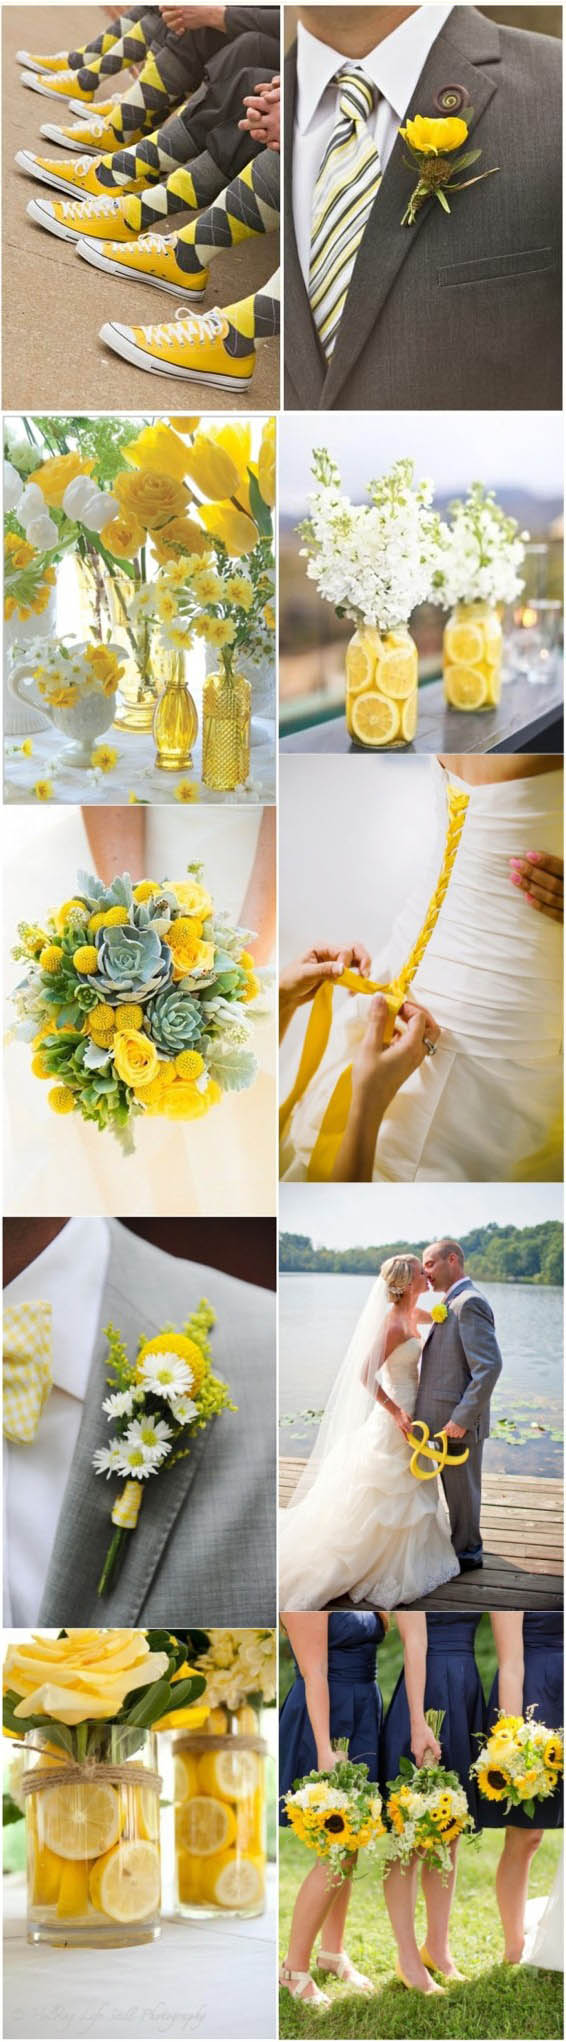 2019 Spring Wedding Color and Ideas